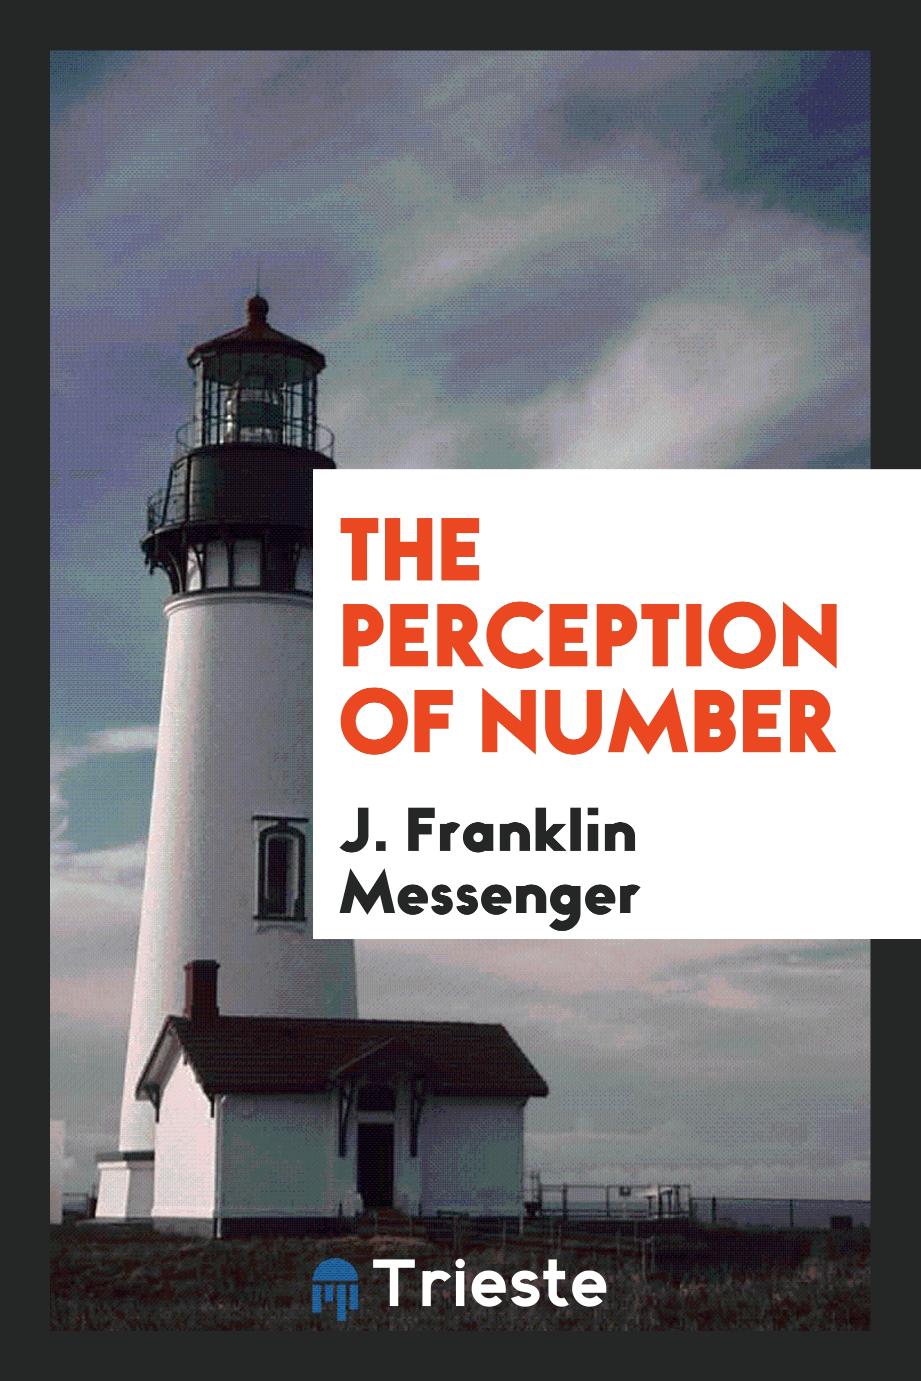 The perception of number